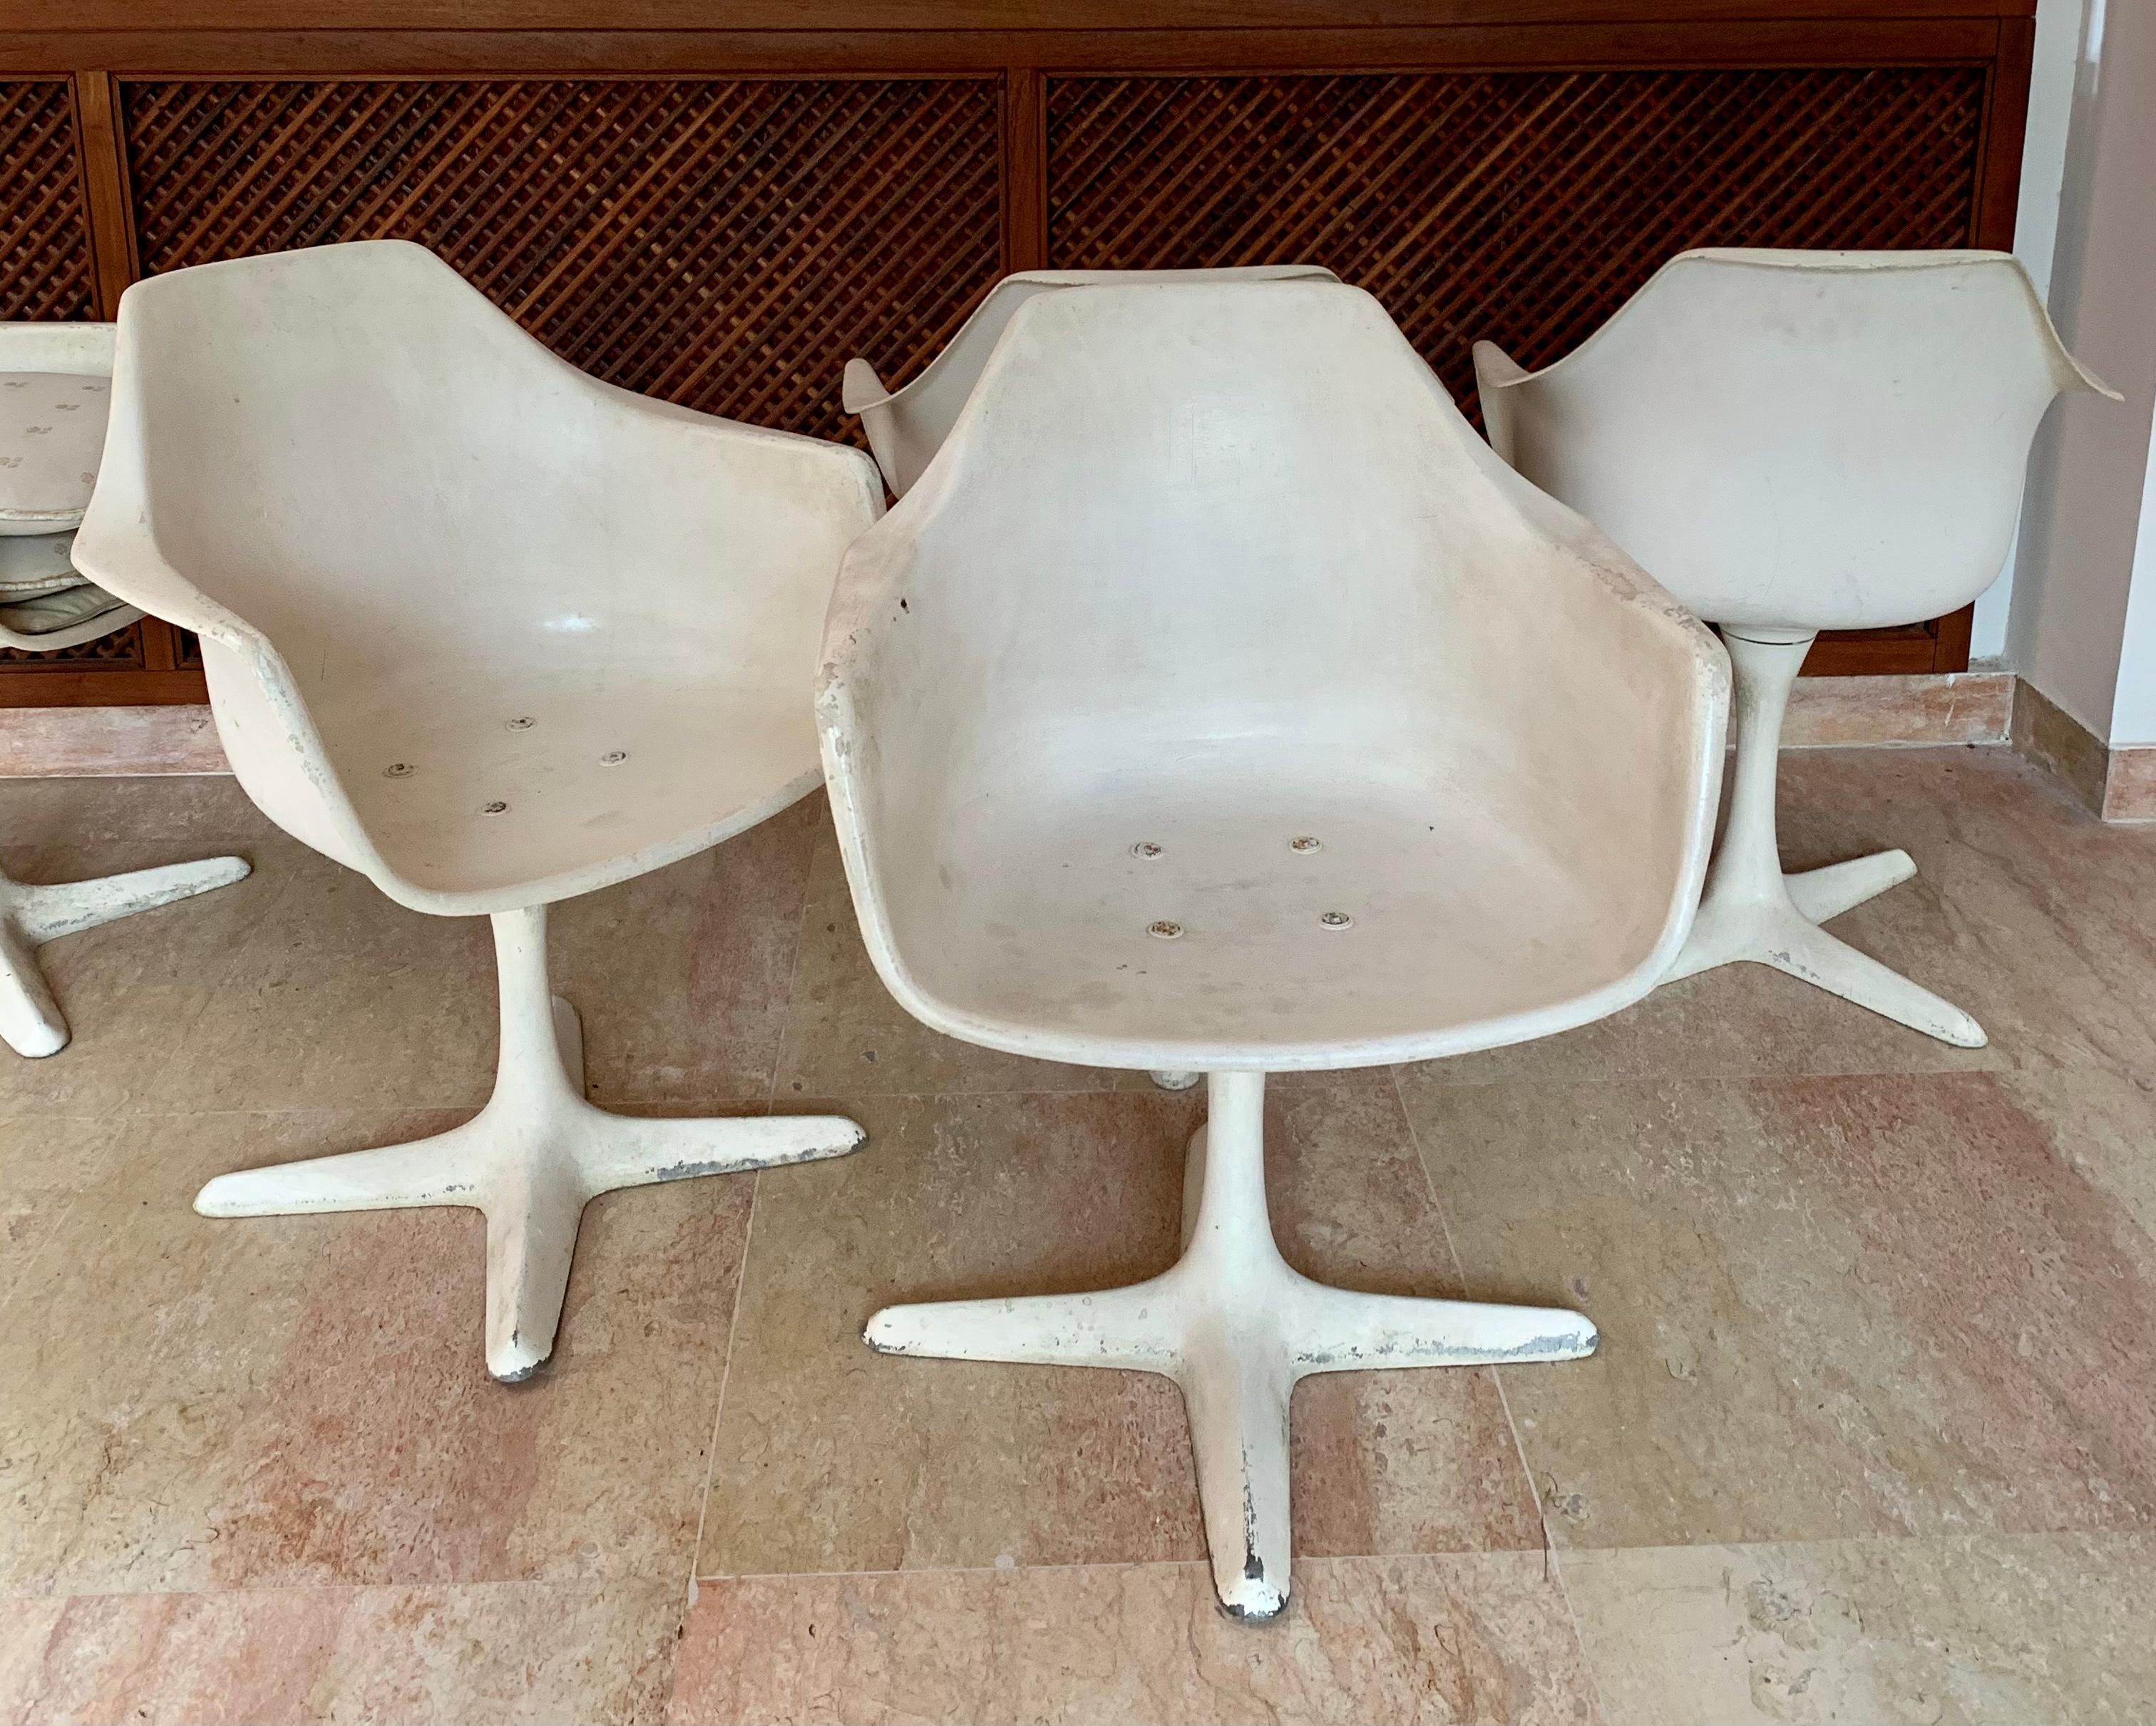 
6 Midcentury modern Maurice Burke armchairs made for Arkana , a British furniture manufacturer. White molded fiberglass chairs raised on a 4 aluminium leg base. Marked underside of seat with Arkana 116 .
